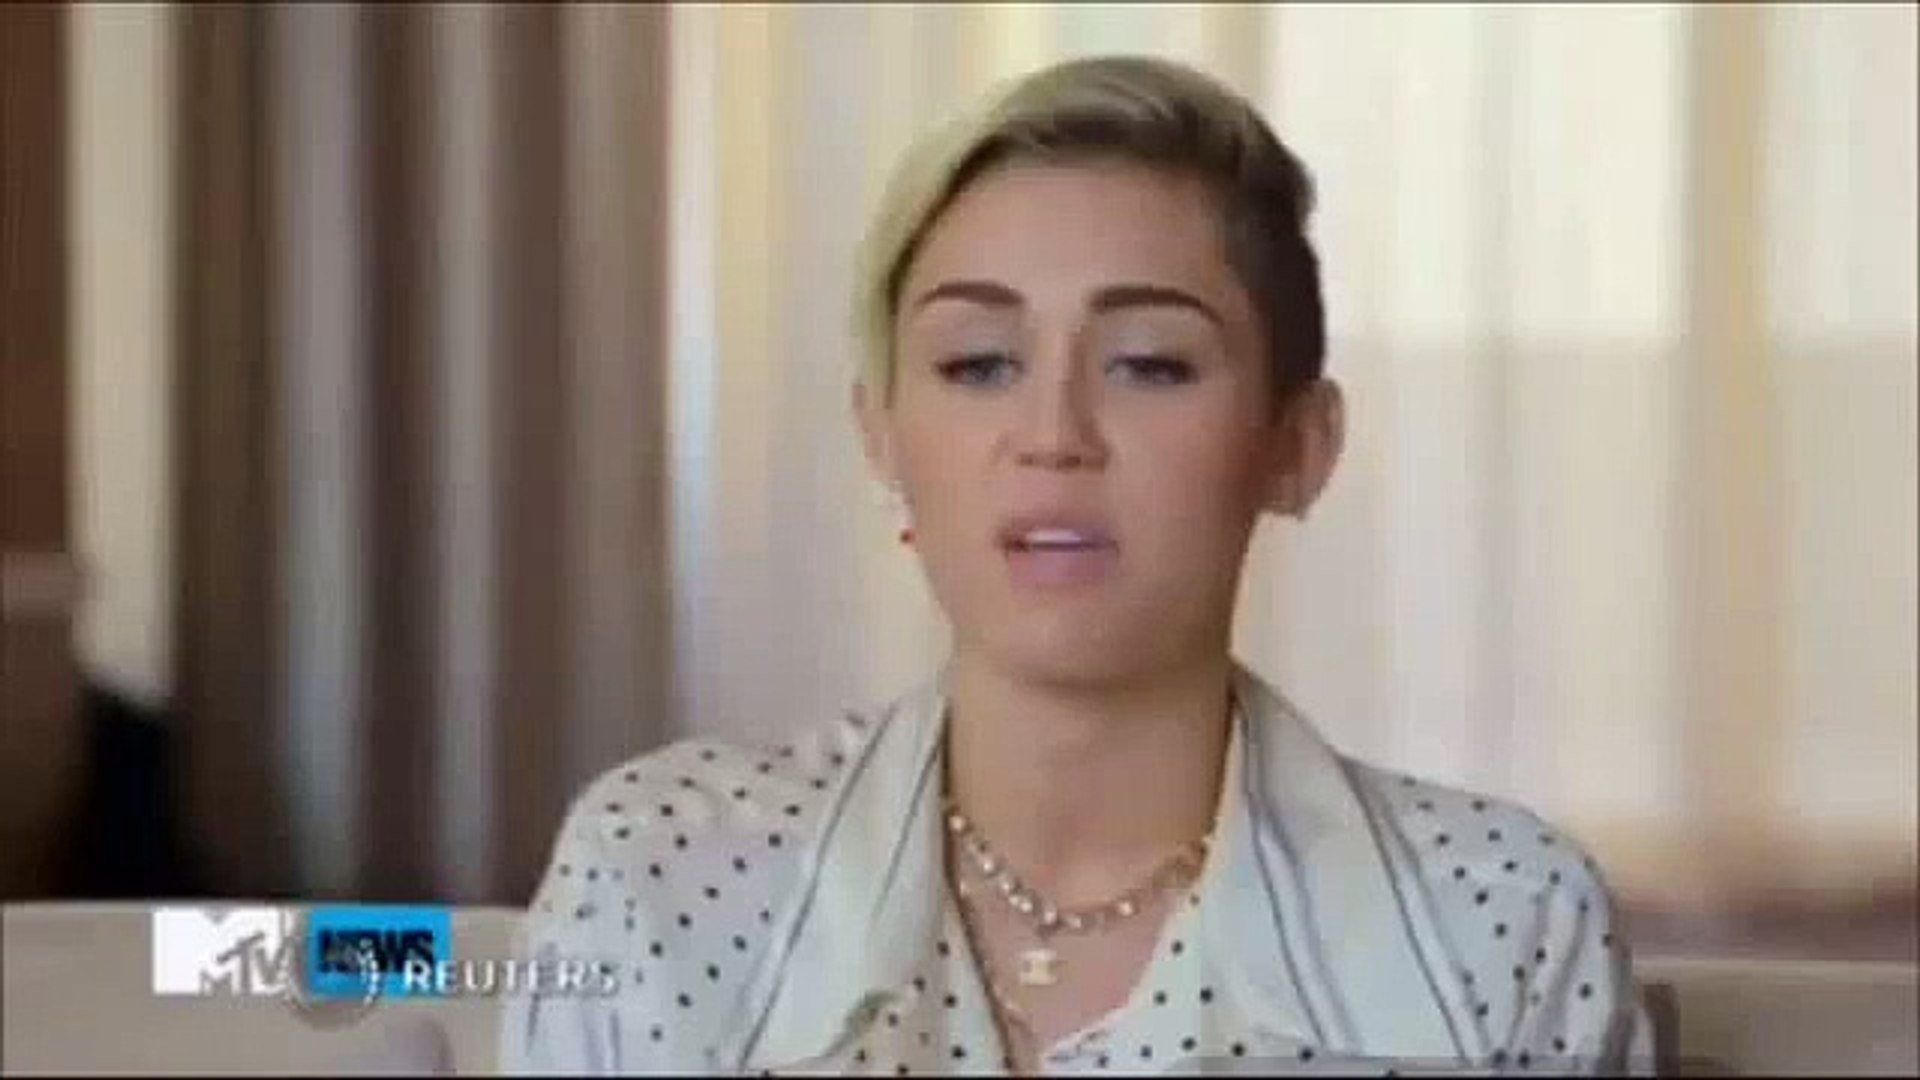 Miley Cyrus claims her VMAs performance 'made history'